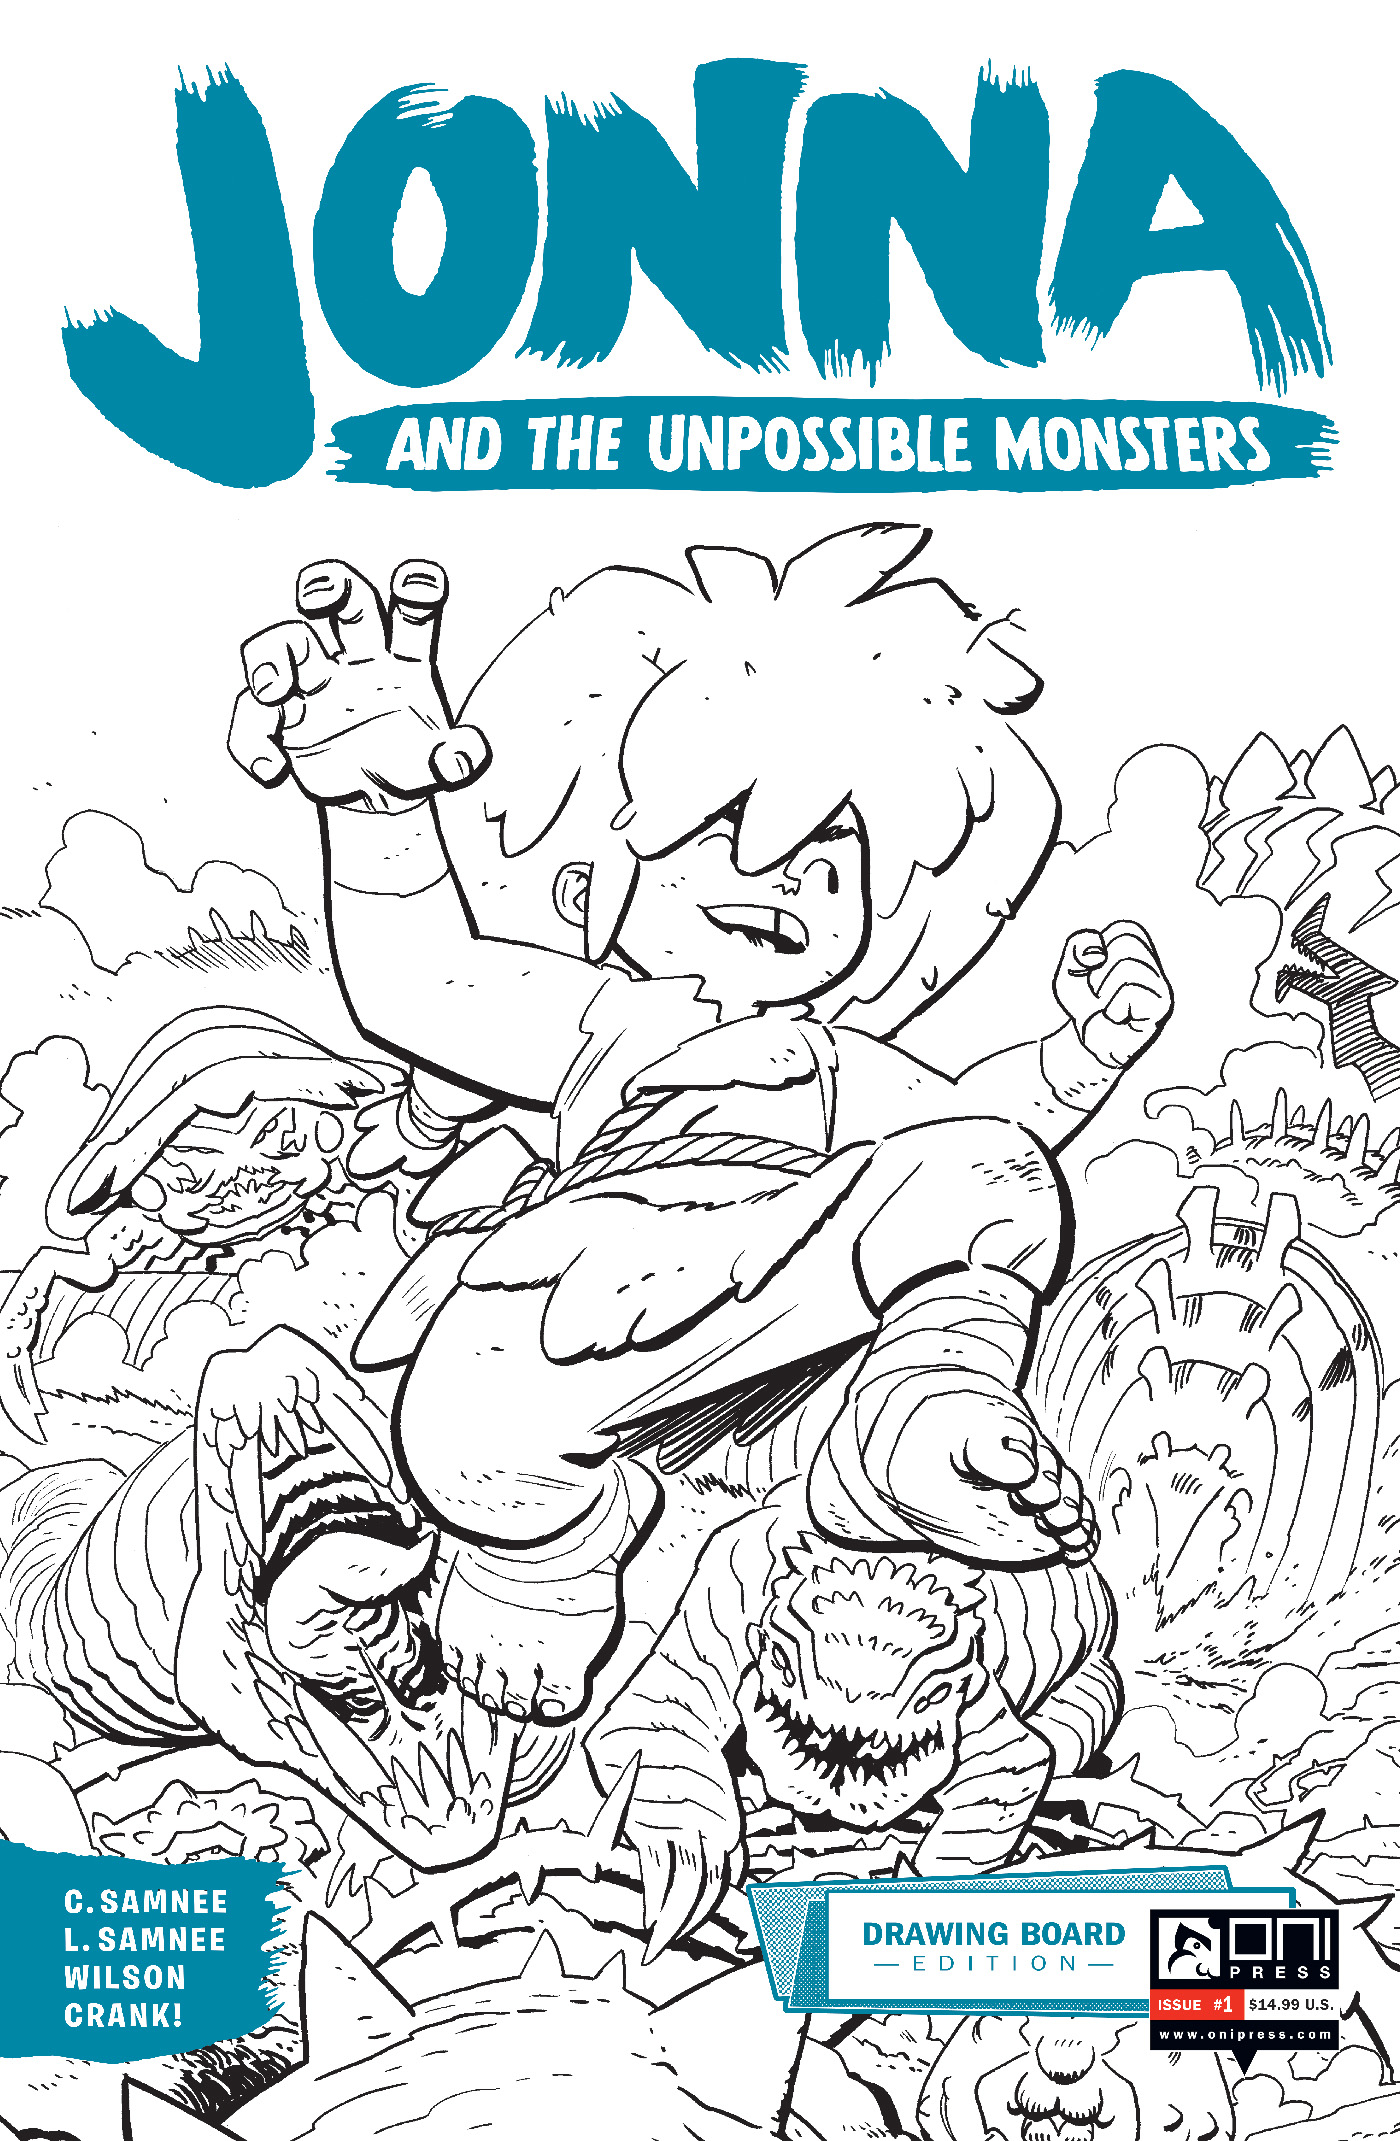 Jonna and the Unpossible Monsters #1 Drawing Board Edition